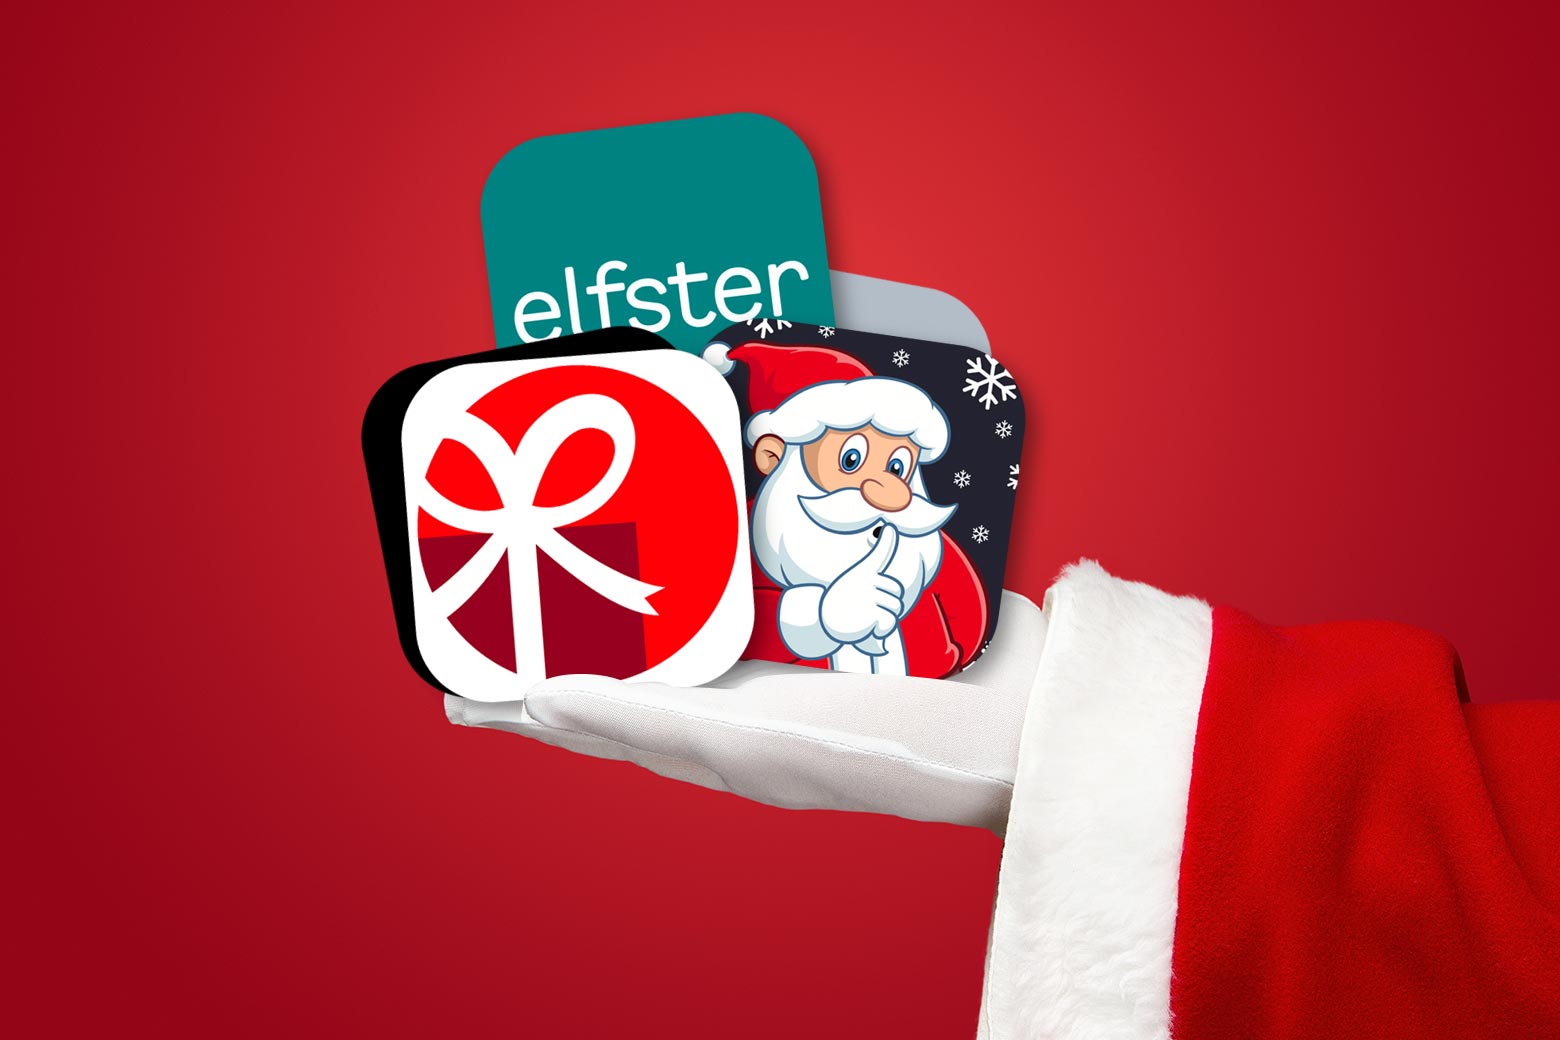 A Santa hand outstretched holding three apps: Elfster, DrawNames, and Santa's Secret Keeper. 